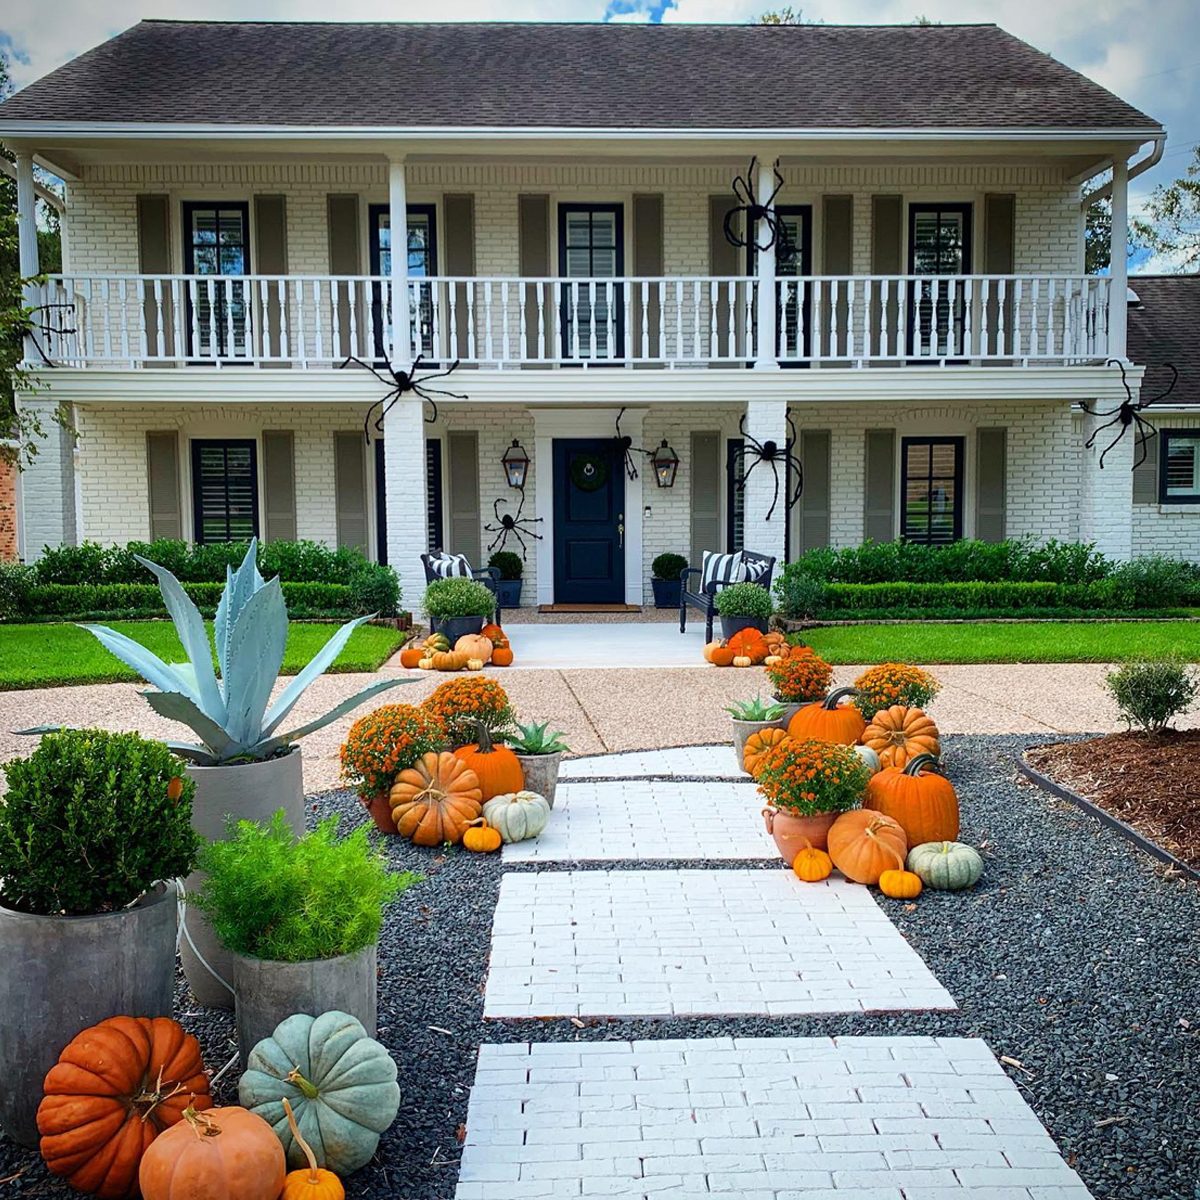 9 Landscaping Ideas To Make Your Home Stand Out for Halloween